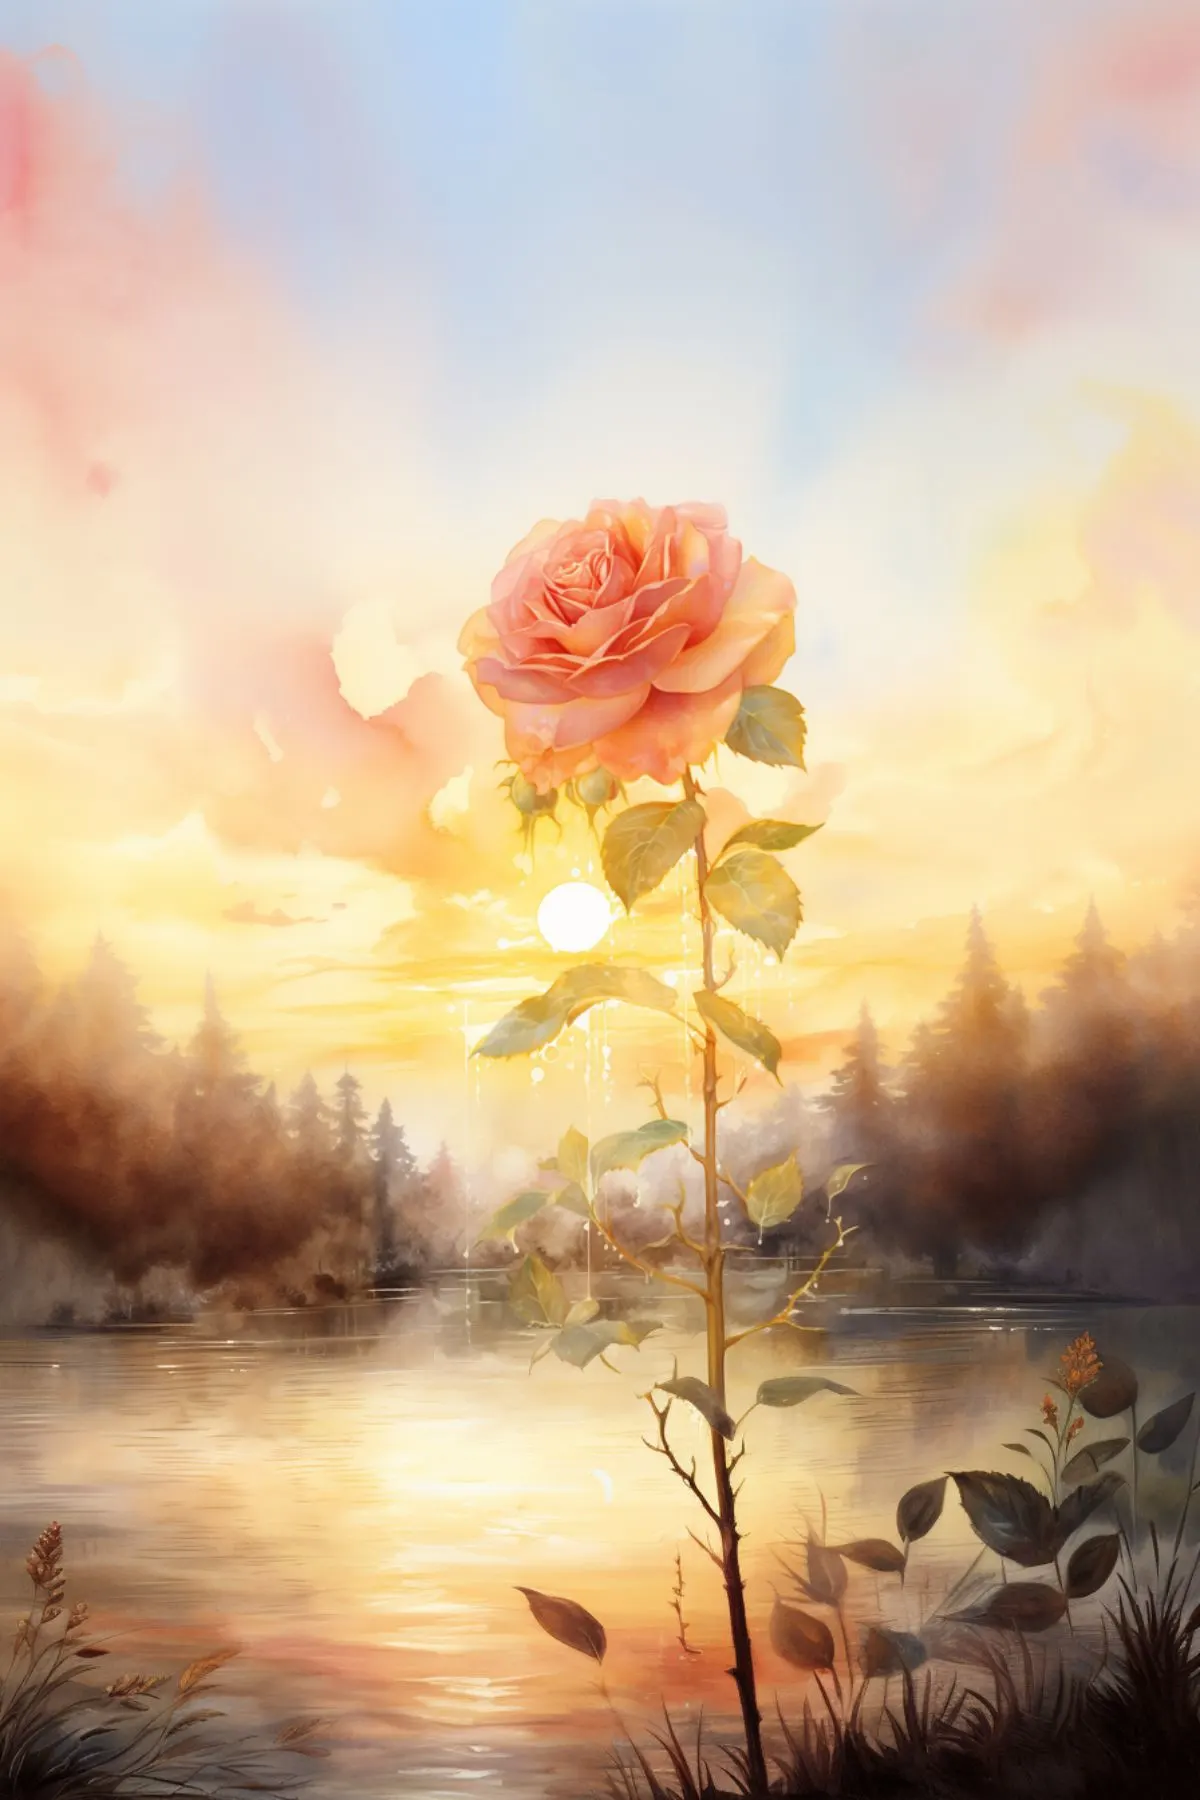 watercolor image of a rose in the great outdoors on a Tuesday morning